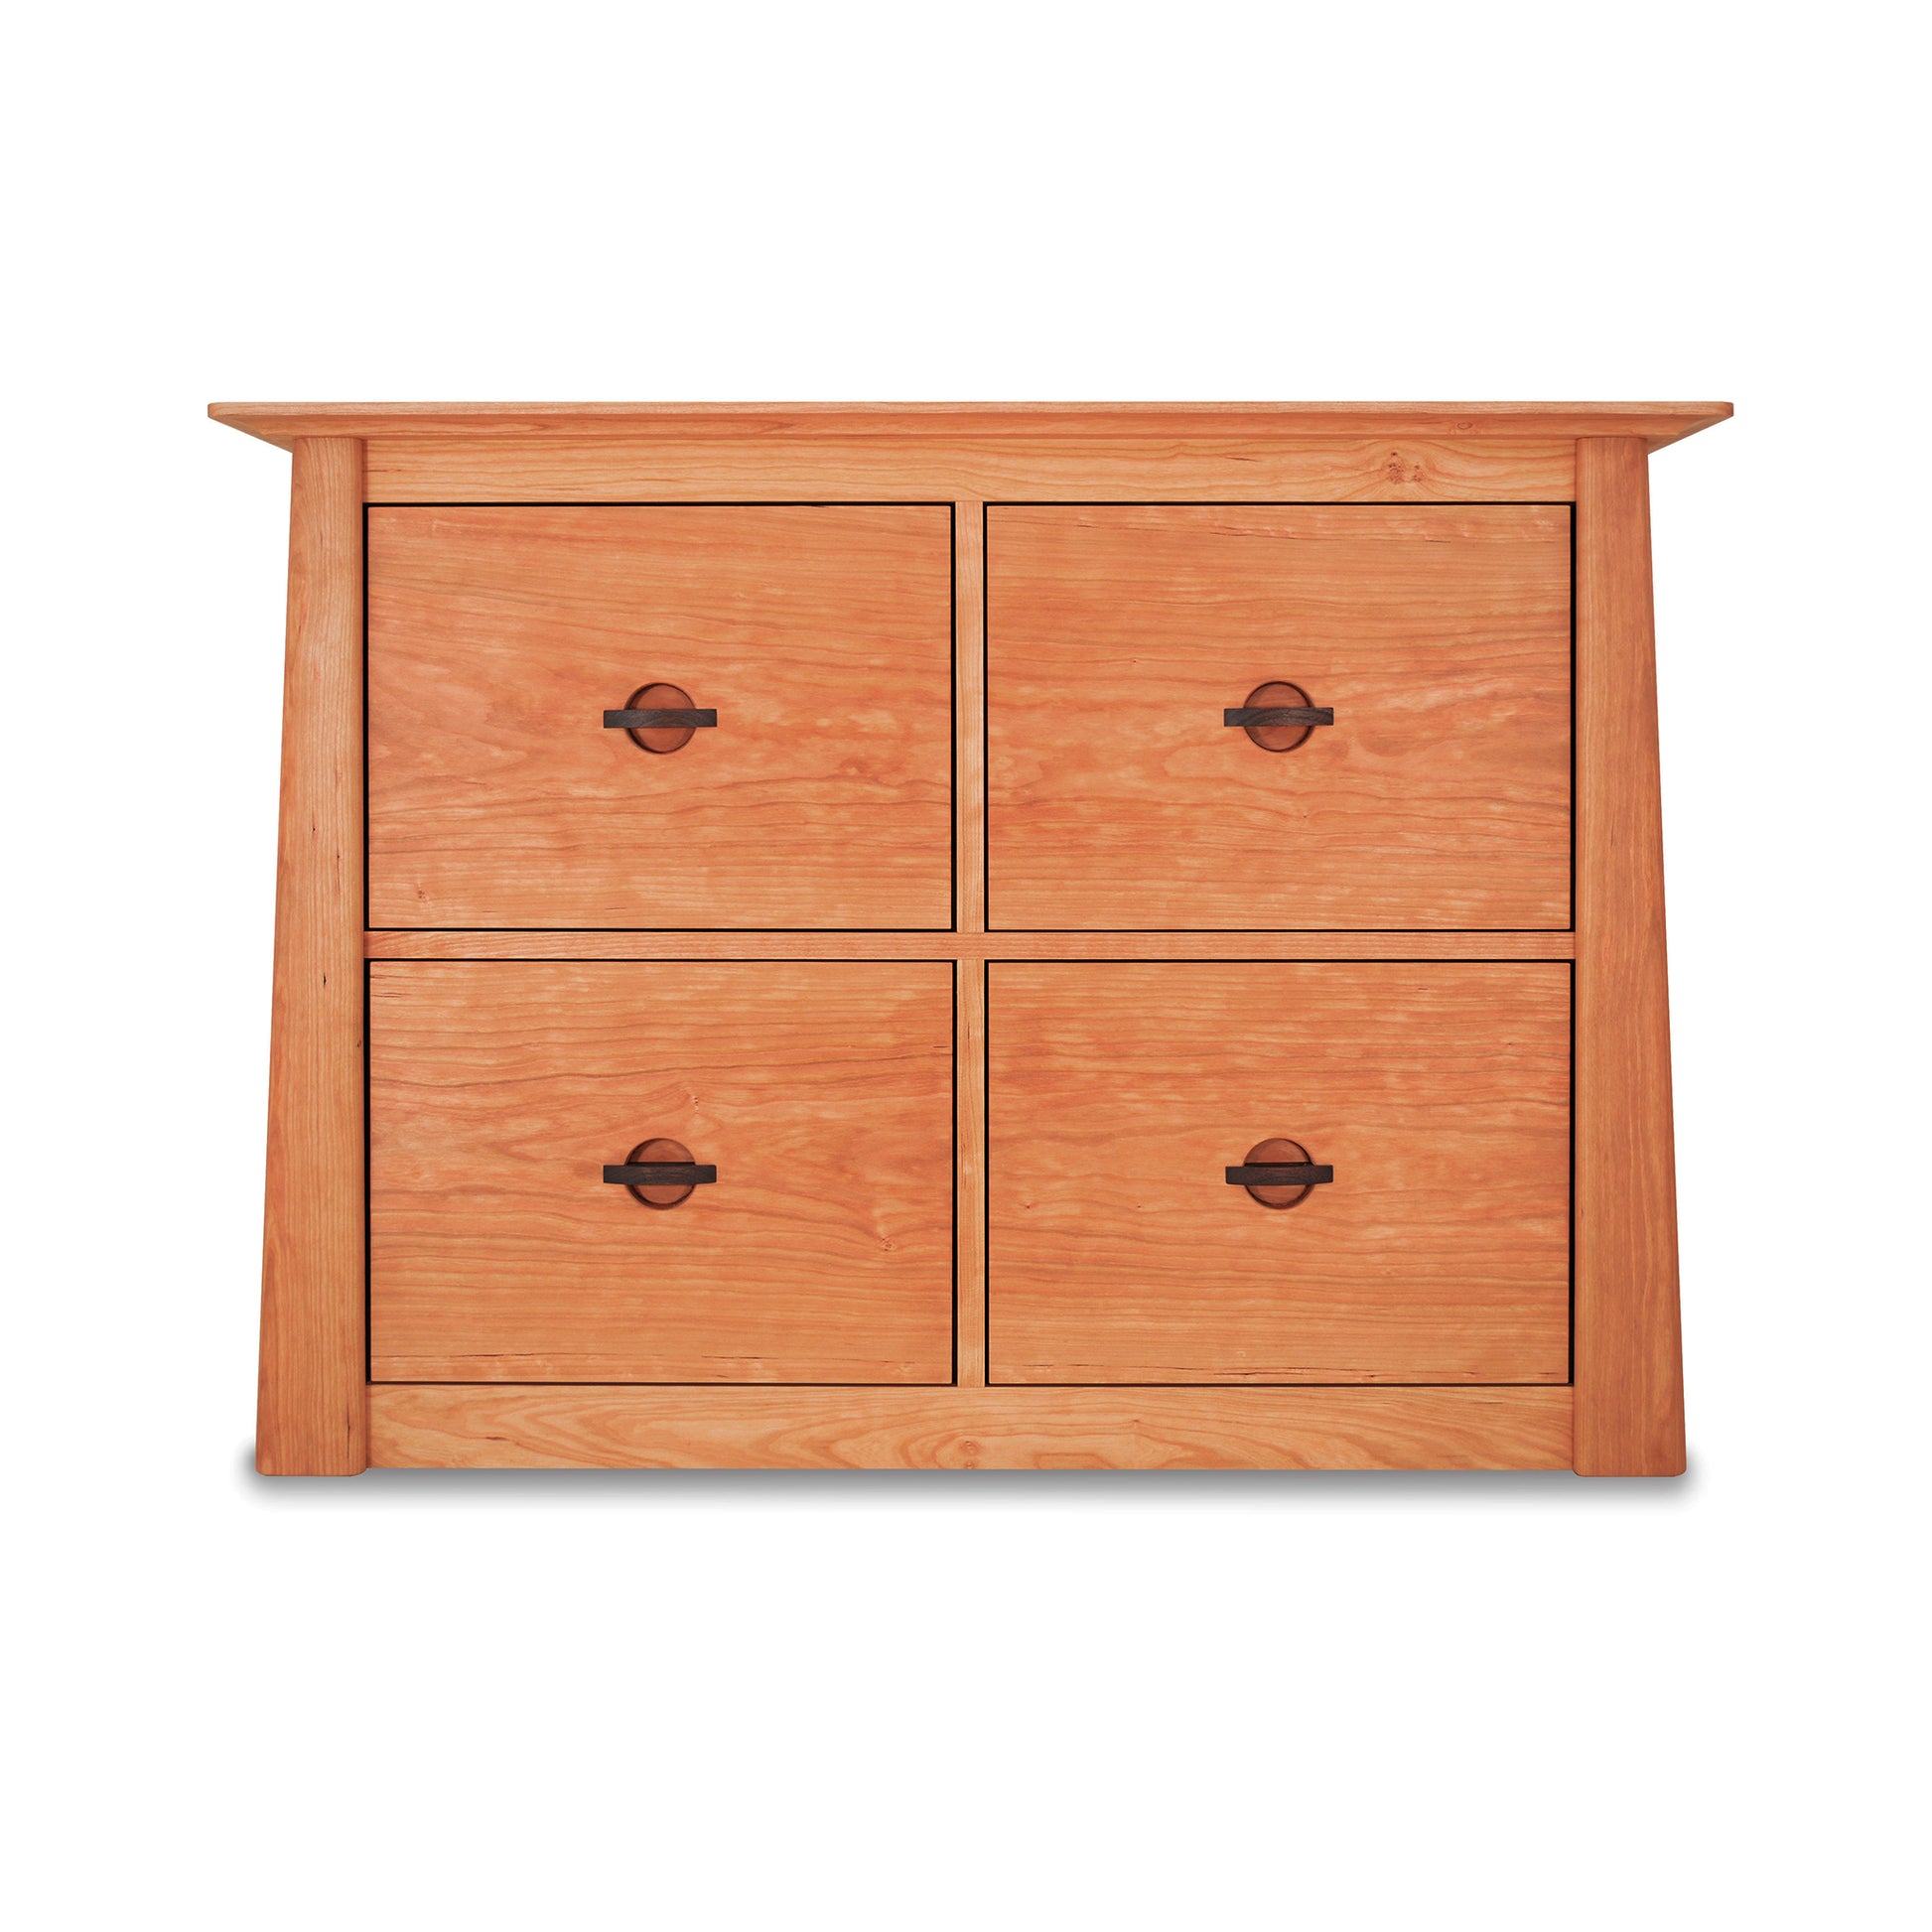 A Cherry Moon 4-Drawer File Credenza, manufactured by Maple Corner Woodworks, with four drawers, ideal for an office or luxury setting.